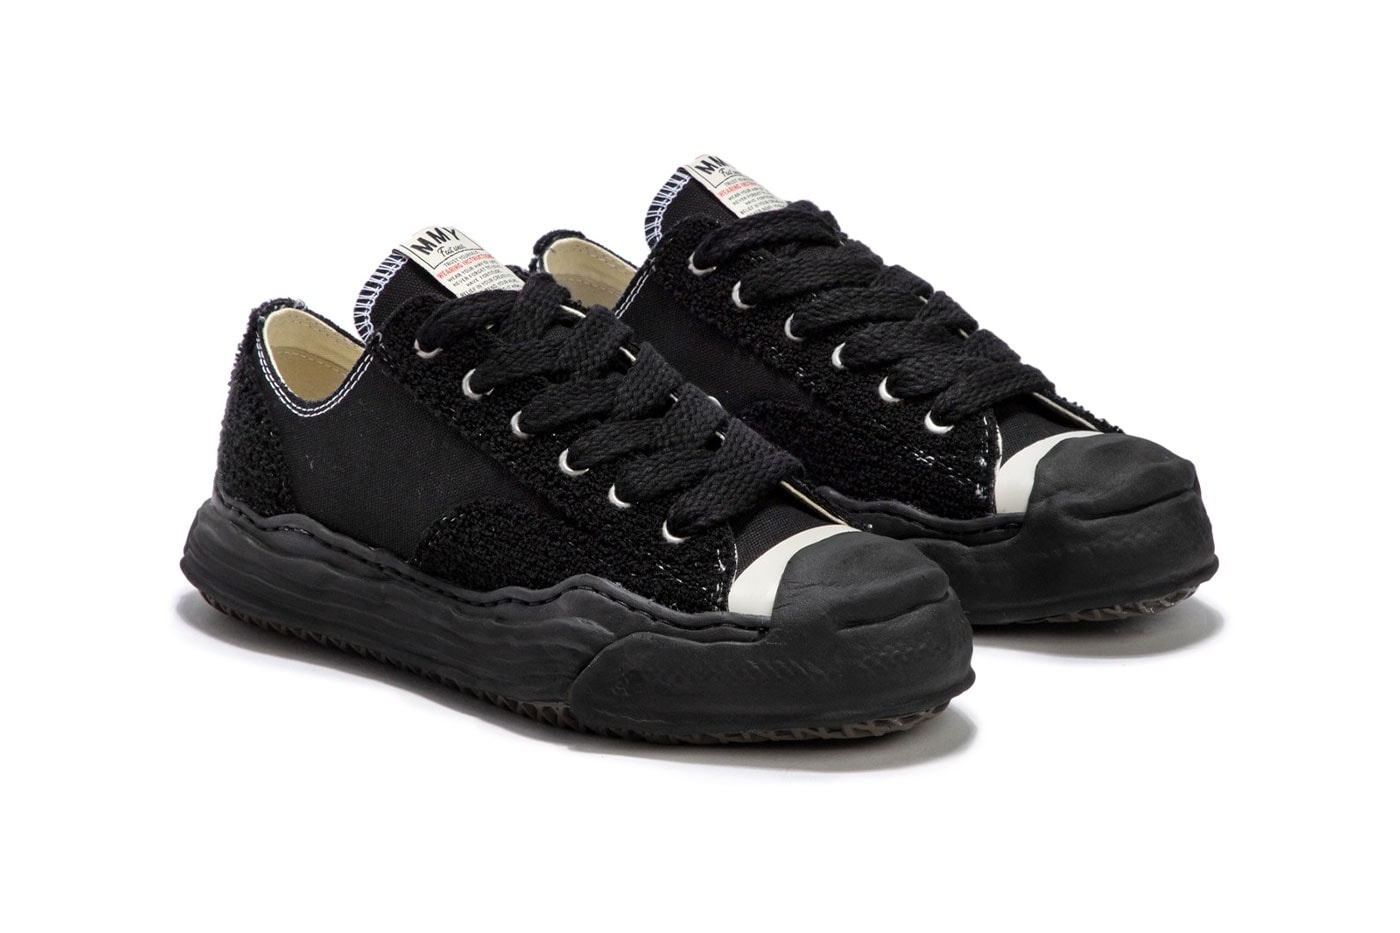 Maison Mihara Yasuhiro Low Top Sneakers New Colorways HBX Release Info Buy Price Blue Black Green White OG Soles